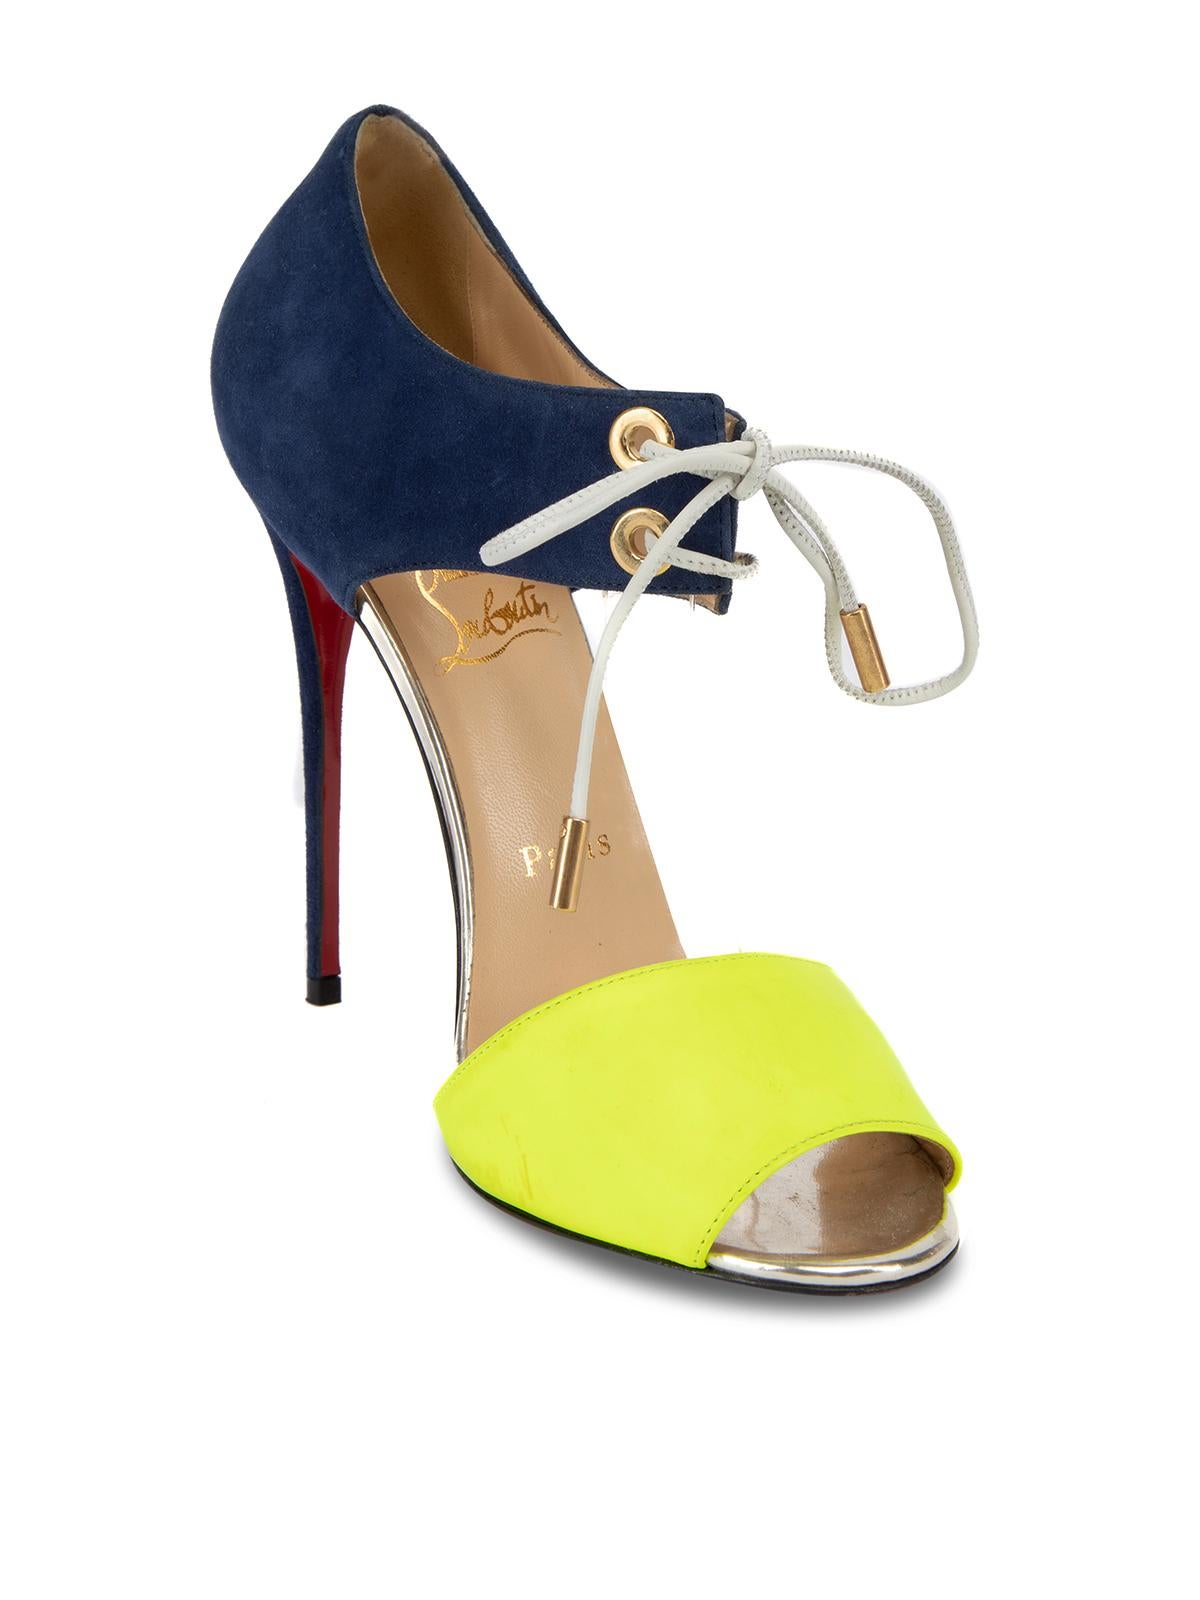 CONDITION is Good. Minor wear to heels is evident. Light wear to the front strap where marks can be seen. There is also wear to the outer suede fabric and the outsole on this used Christian Louboutin designer resale item.   Details  Multicolour-